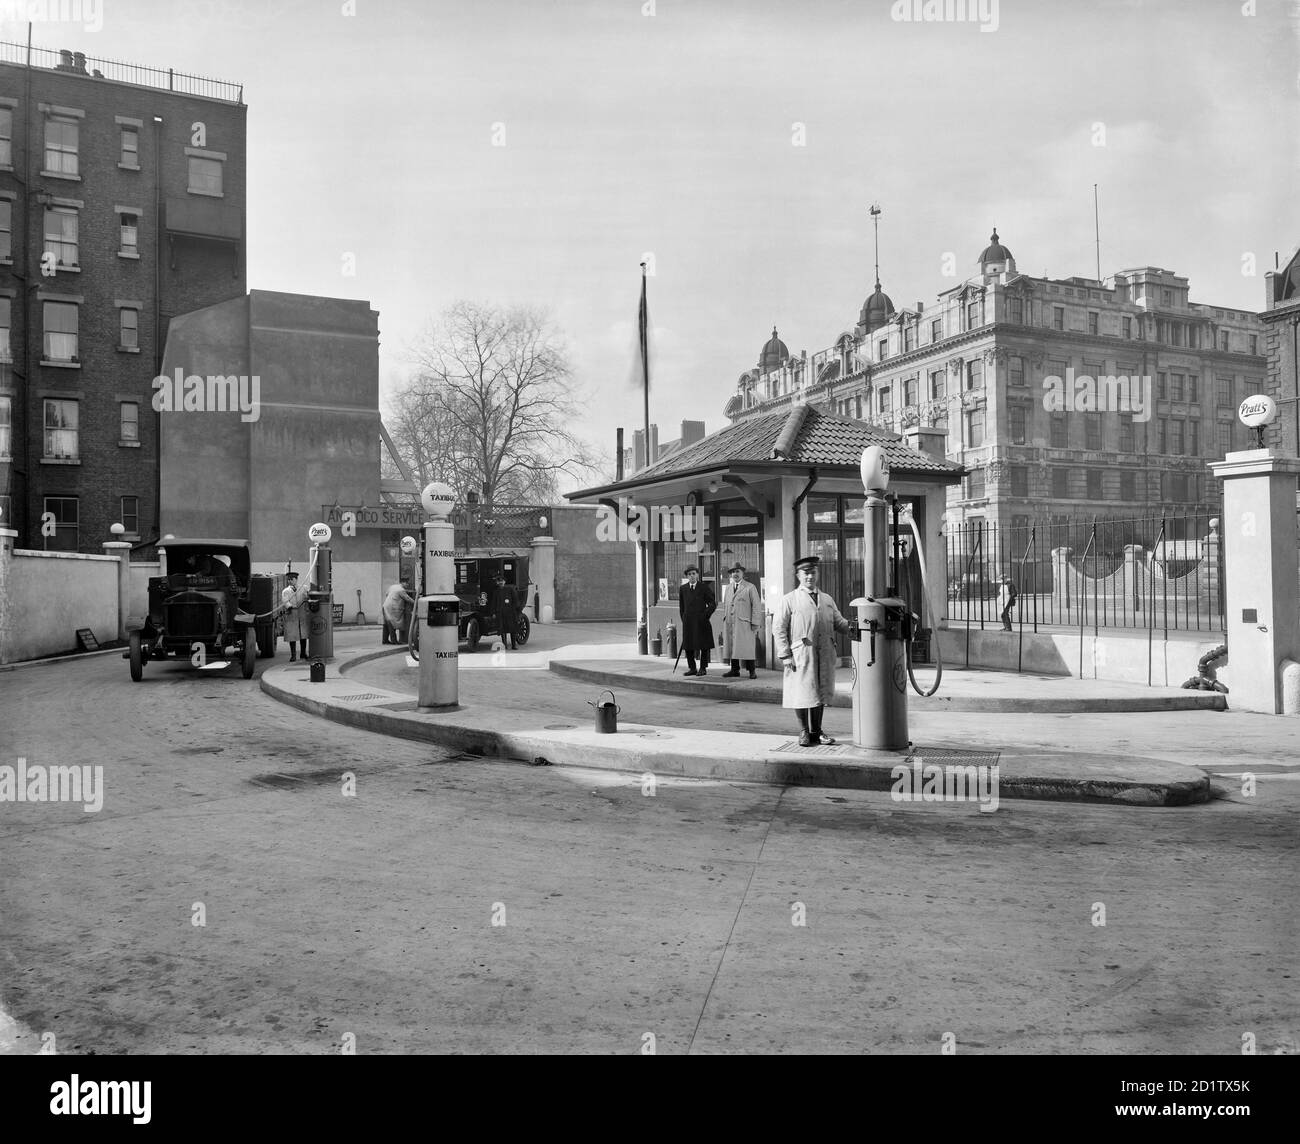 EUSTON ROAD, London. Anglo-American Oil Company petrol station. The company was founded in 1888, importing lamp oil and later motor spirit from the US, including a range of grades. Some grades were sold under the  Pratt's brand. The company later went on to become Esso. Photographed by Bedford Lemere & Co in 1922. Stock Photo